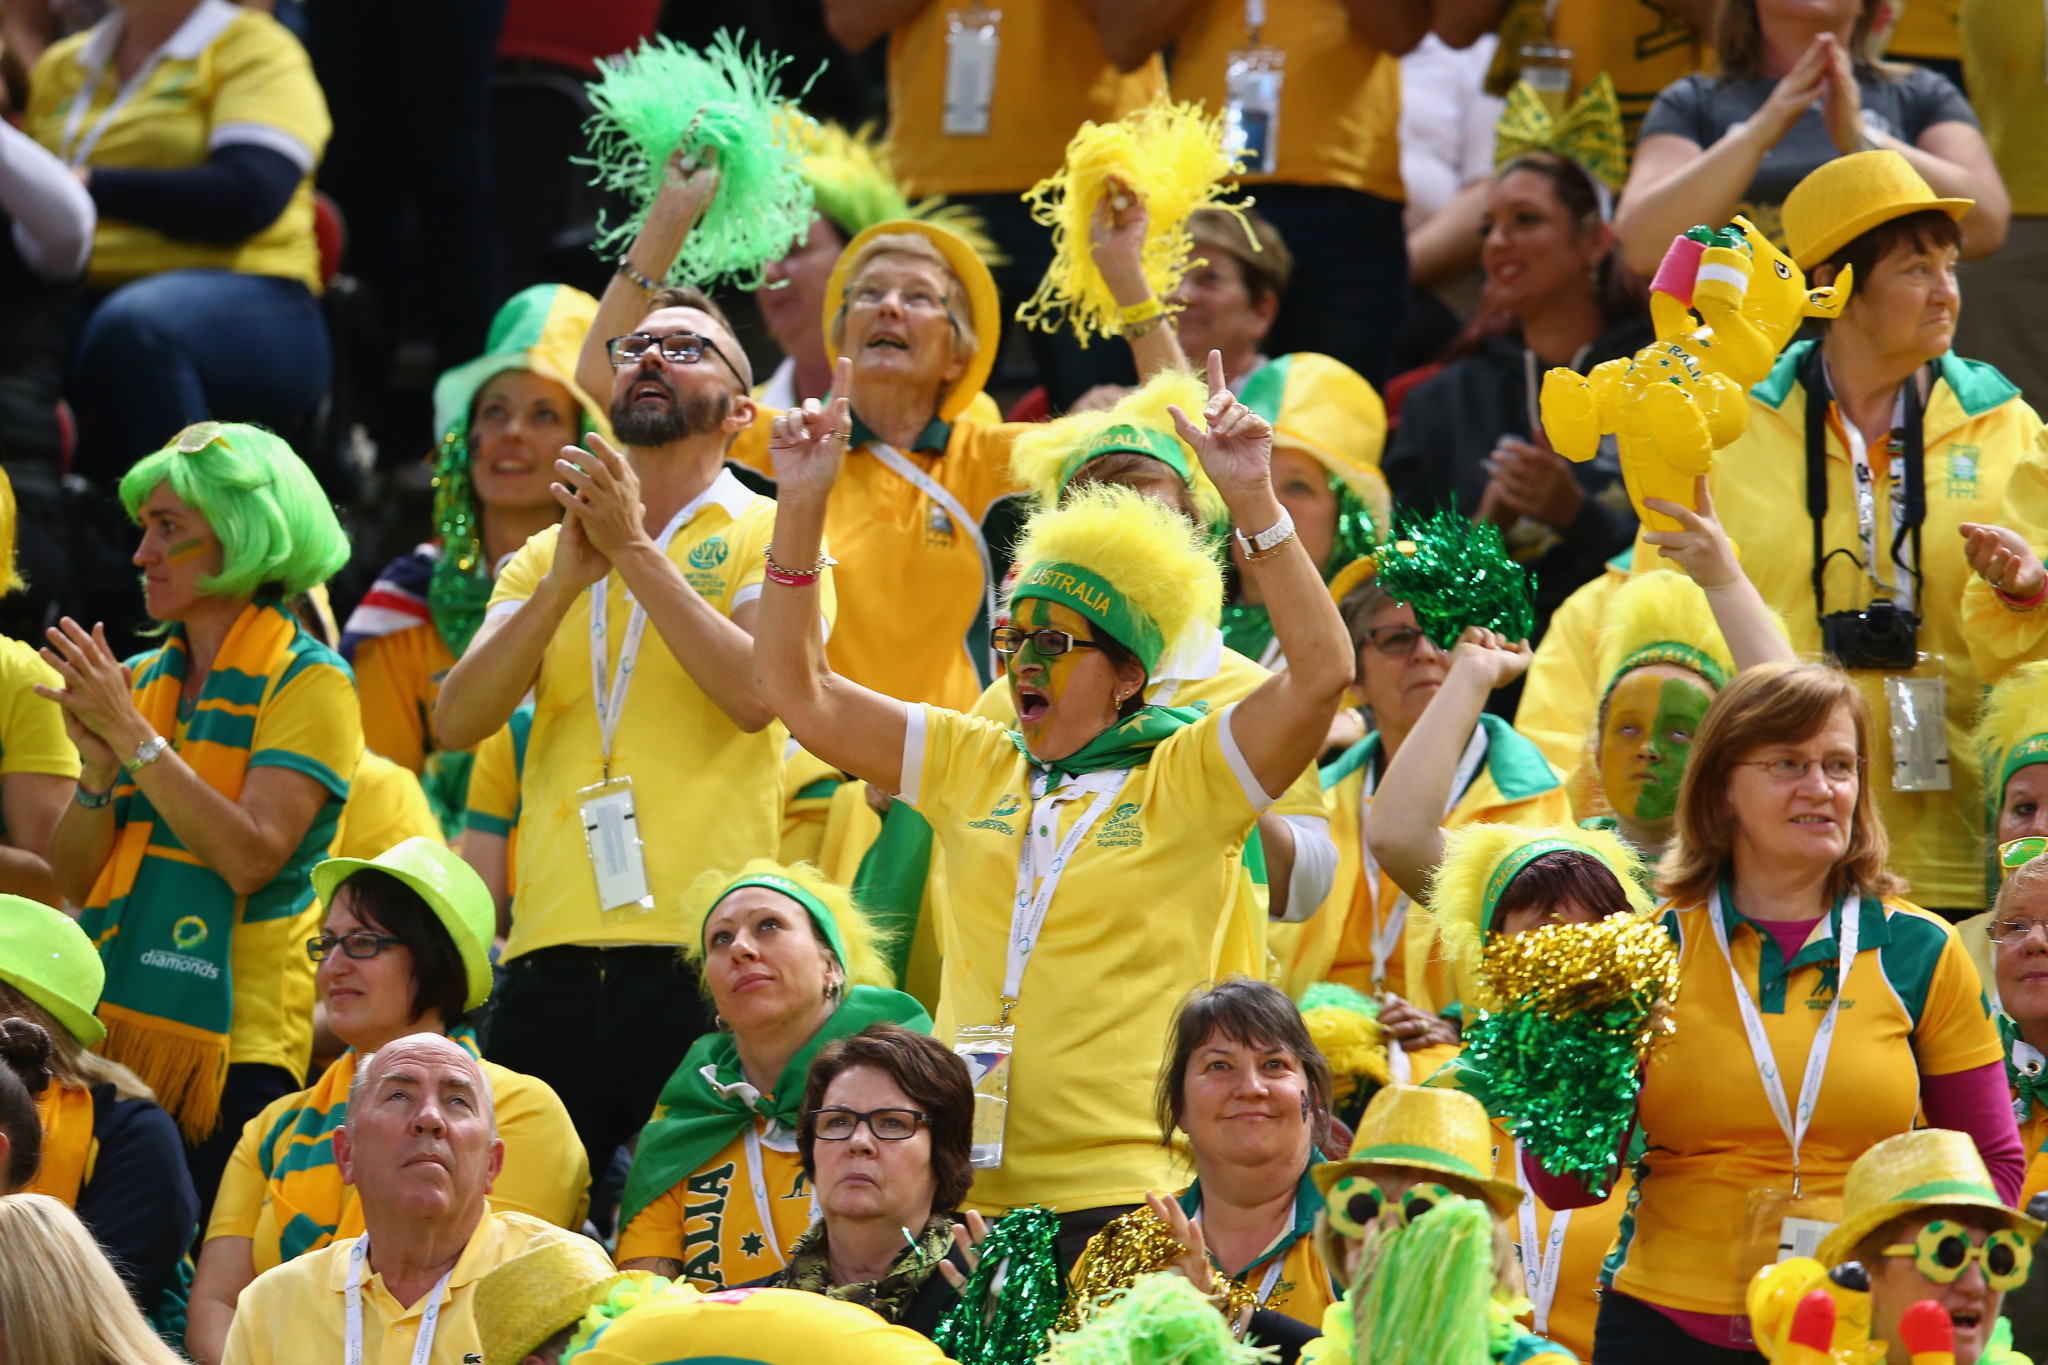 Australian fans may have another home Netball World Cup to look forward to in 2027 if their bid is successful ©Getty Images